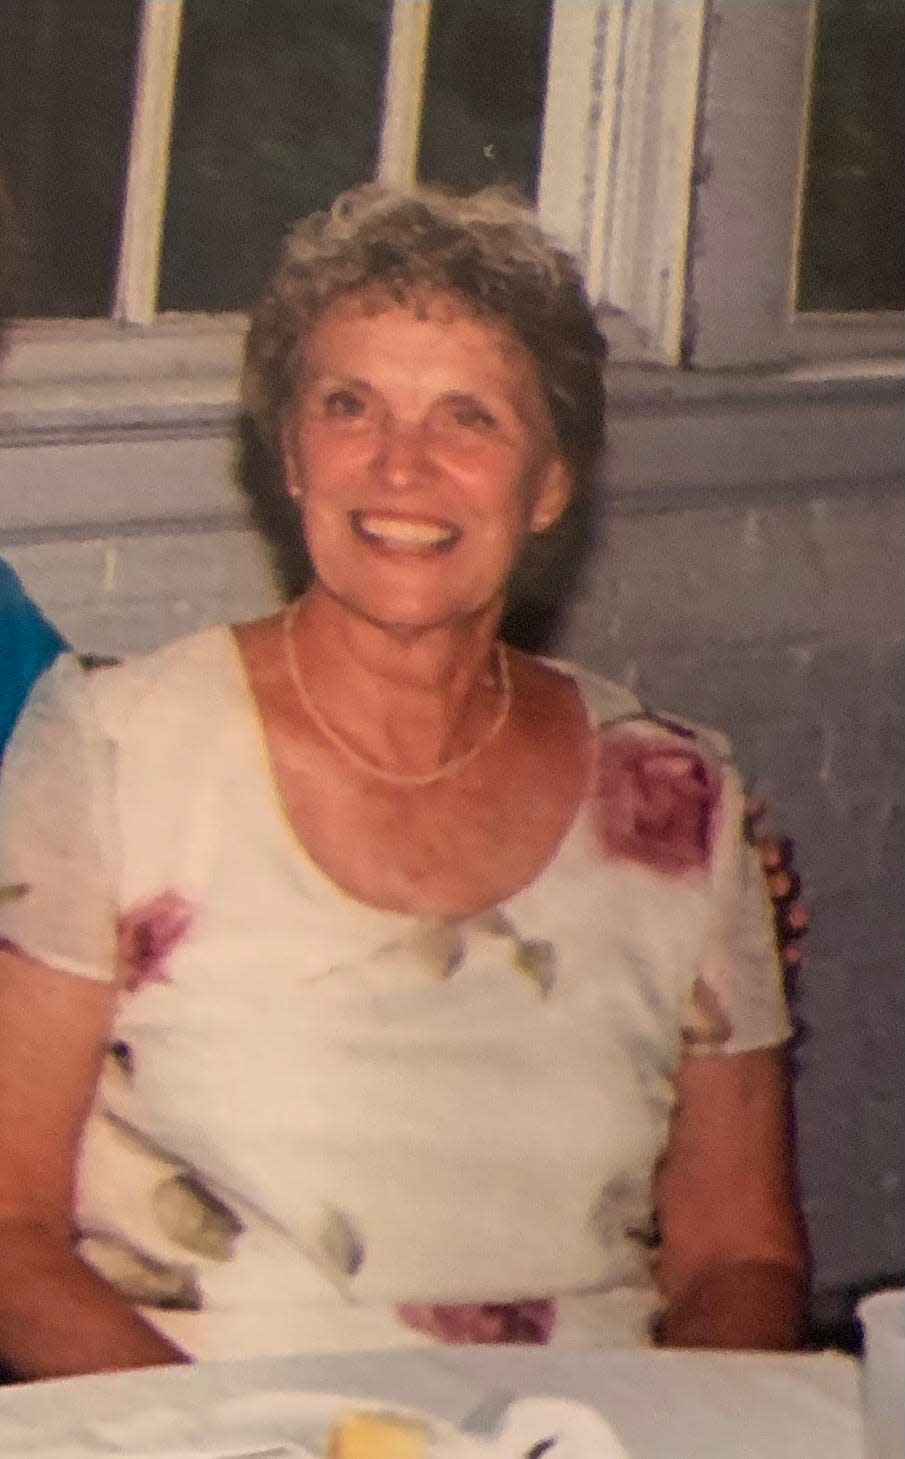 Beverly Kinney was a long-time teacher at Princeton City Schools and patron of the arts. She was killed Jan. 11 after being struck by a  Cincinnati Metro bus while walking in Hyde Park. Authorities said she was in a marked crosswalk at Dana Avenue and Duck Creek Road, crossing with a walk signal, when hit.